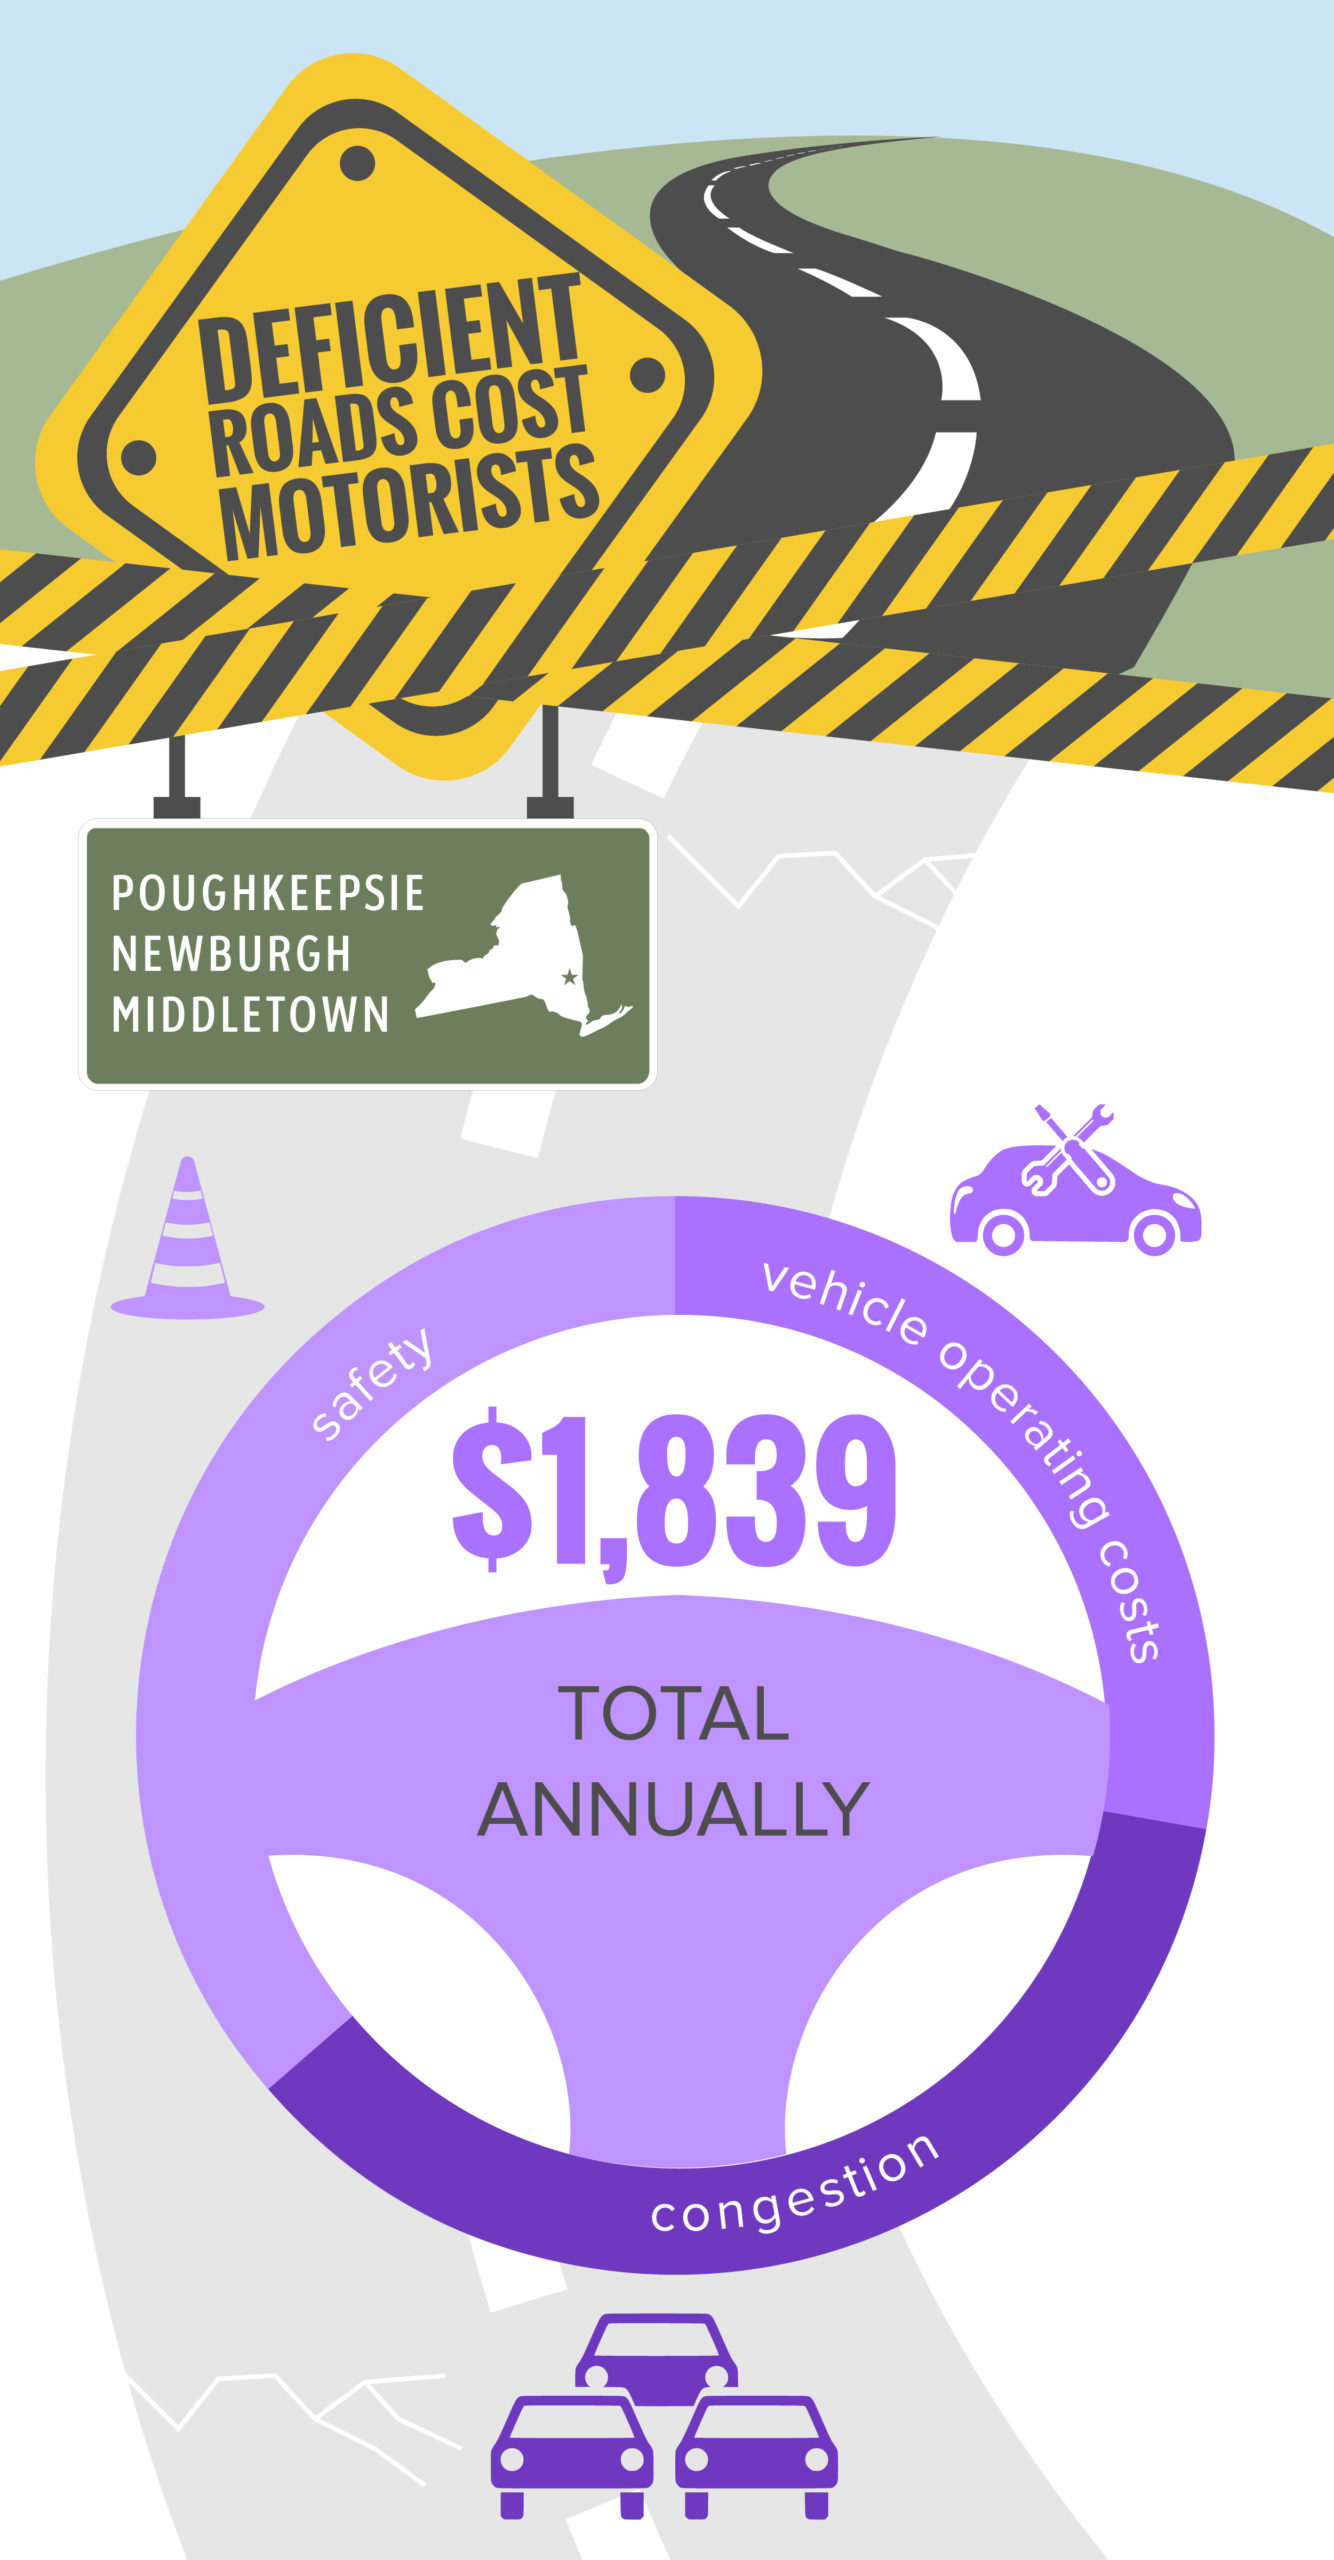 Poughkeepsie-Newburgh-Middletown Deficient Roads Cost to Motorists Infographic – January 2022